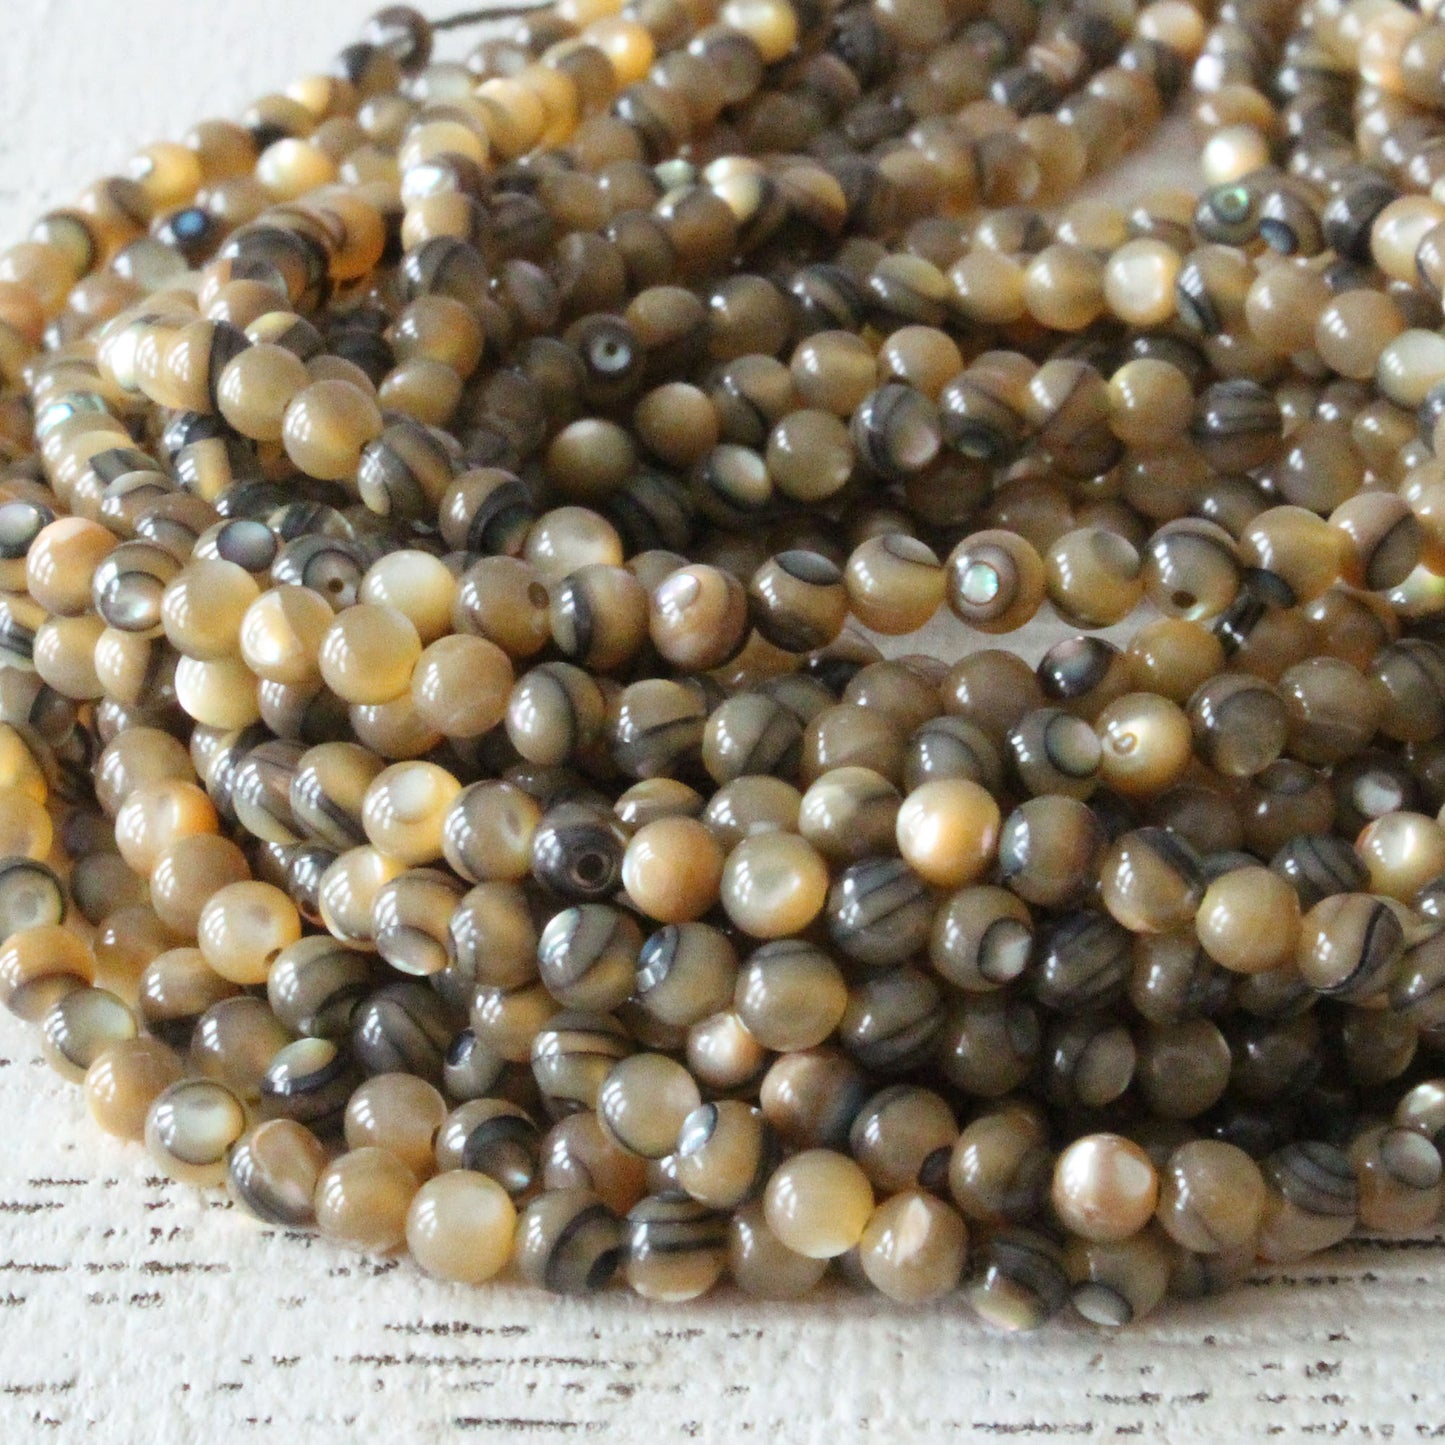 3mm Round Abalone Beads - 8 inches